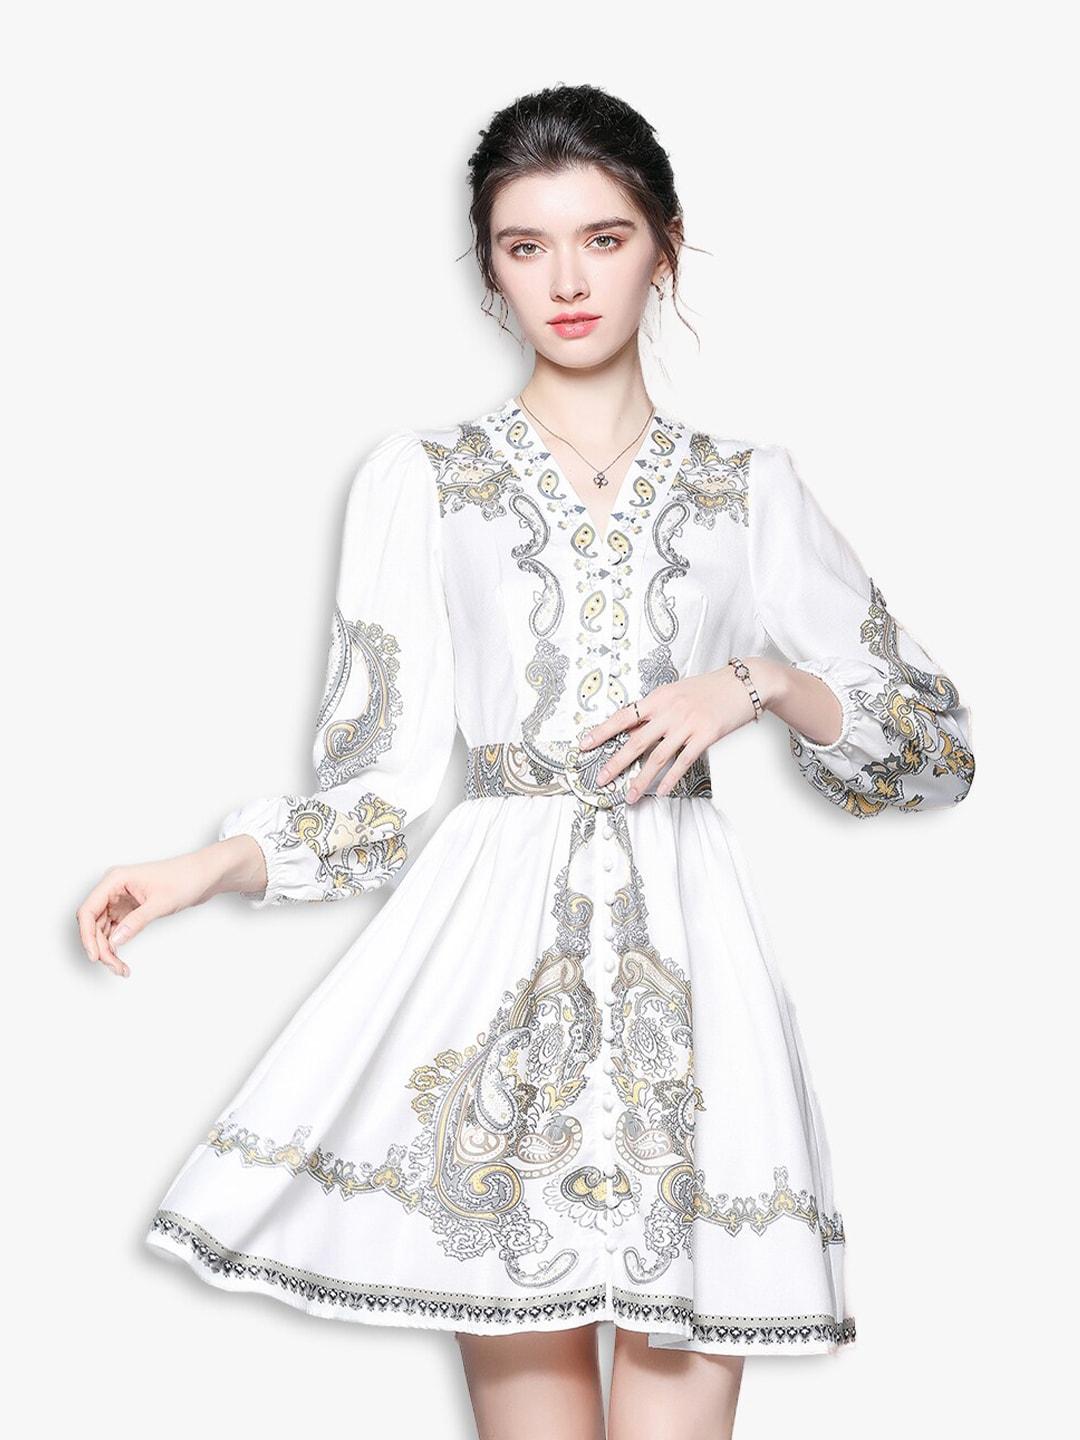 jc collection white floral dress